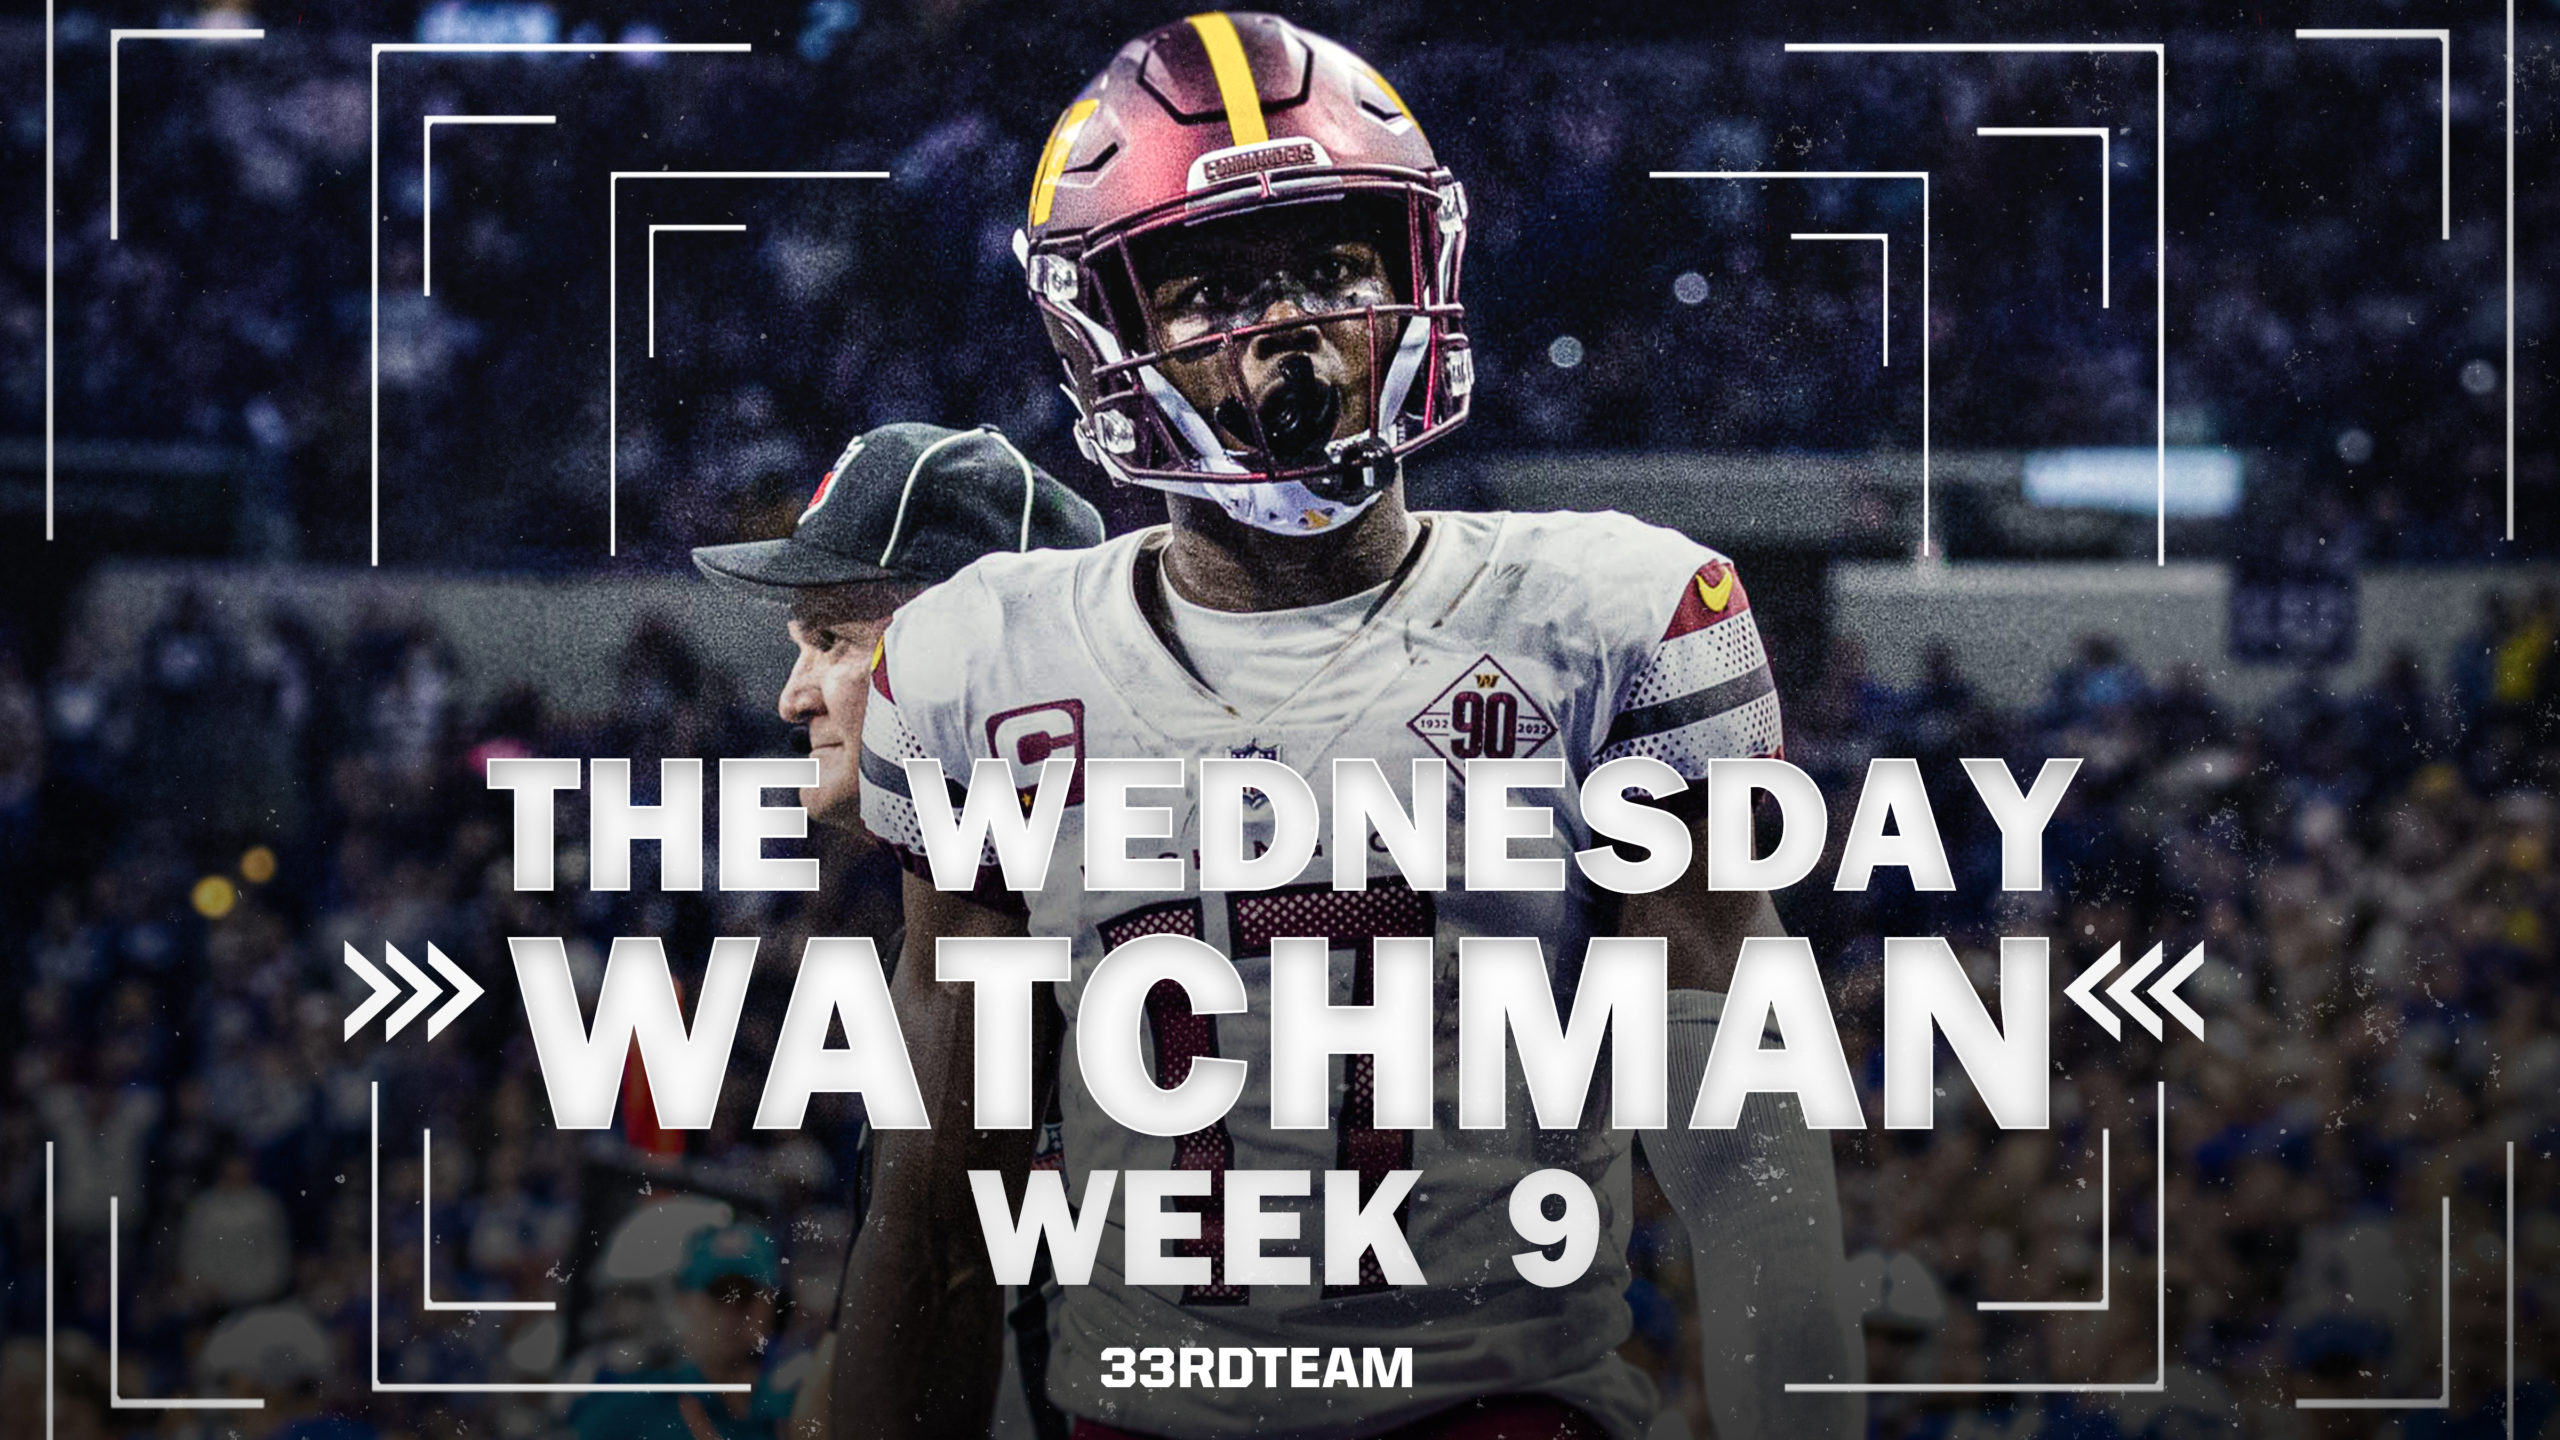 The Wednesday Watchman: NFL Week 9 Betting, DFS and Fantasy Information to Know